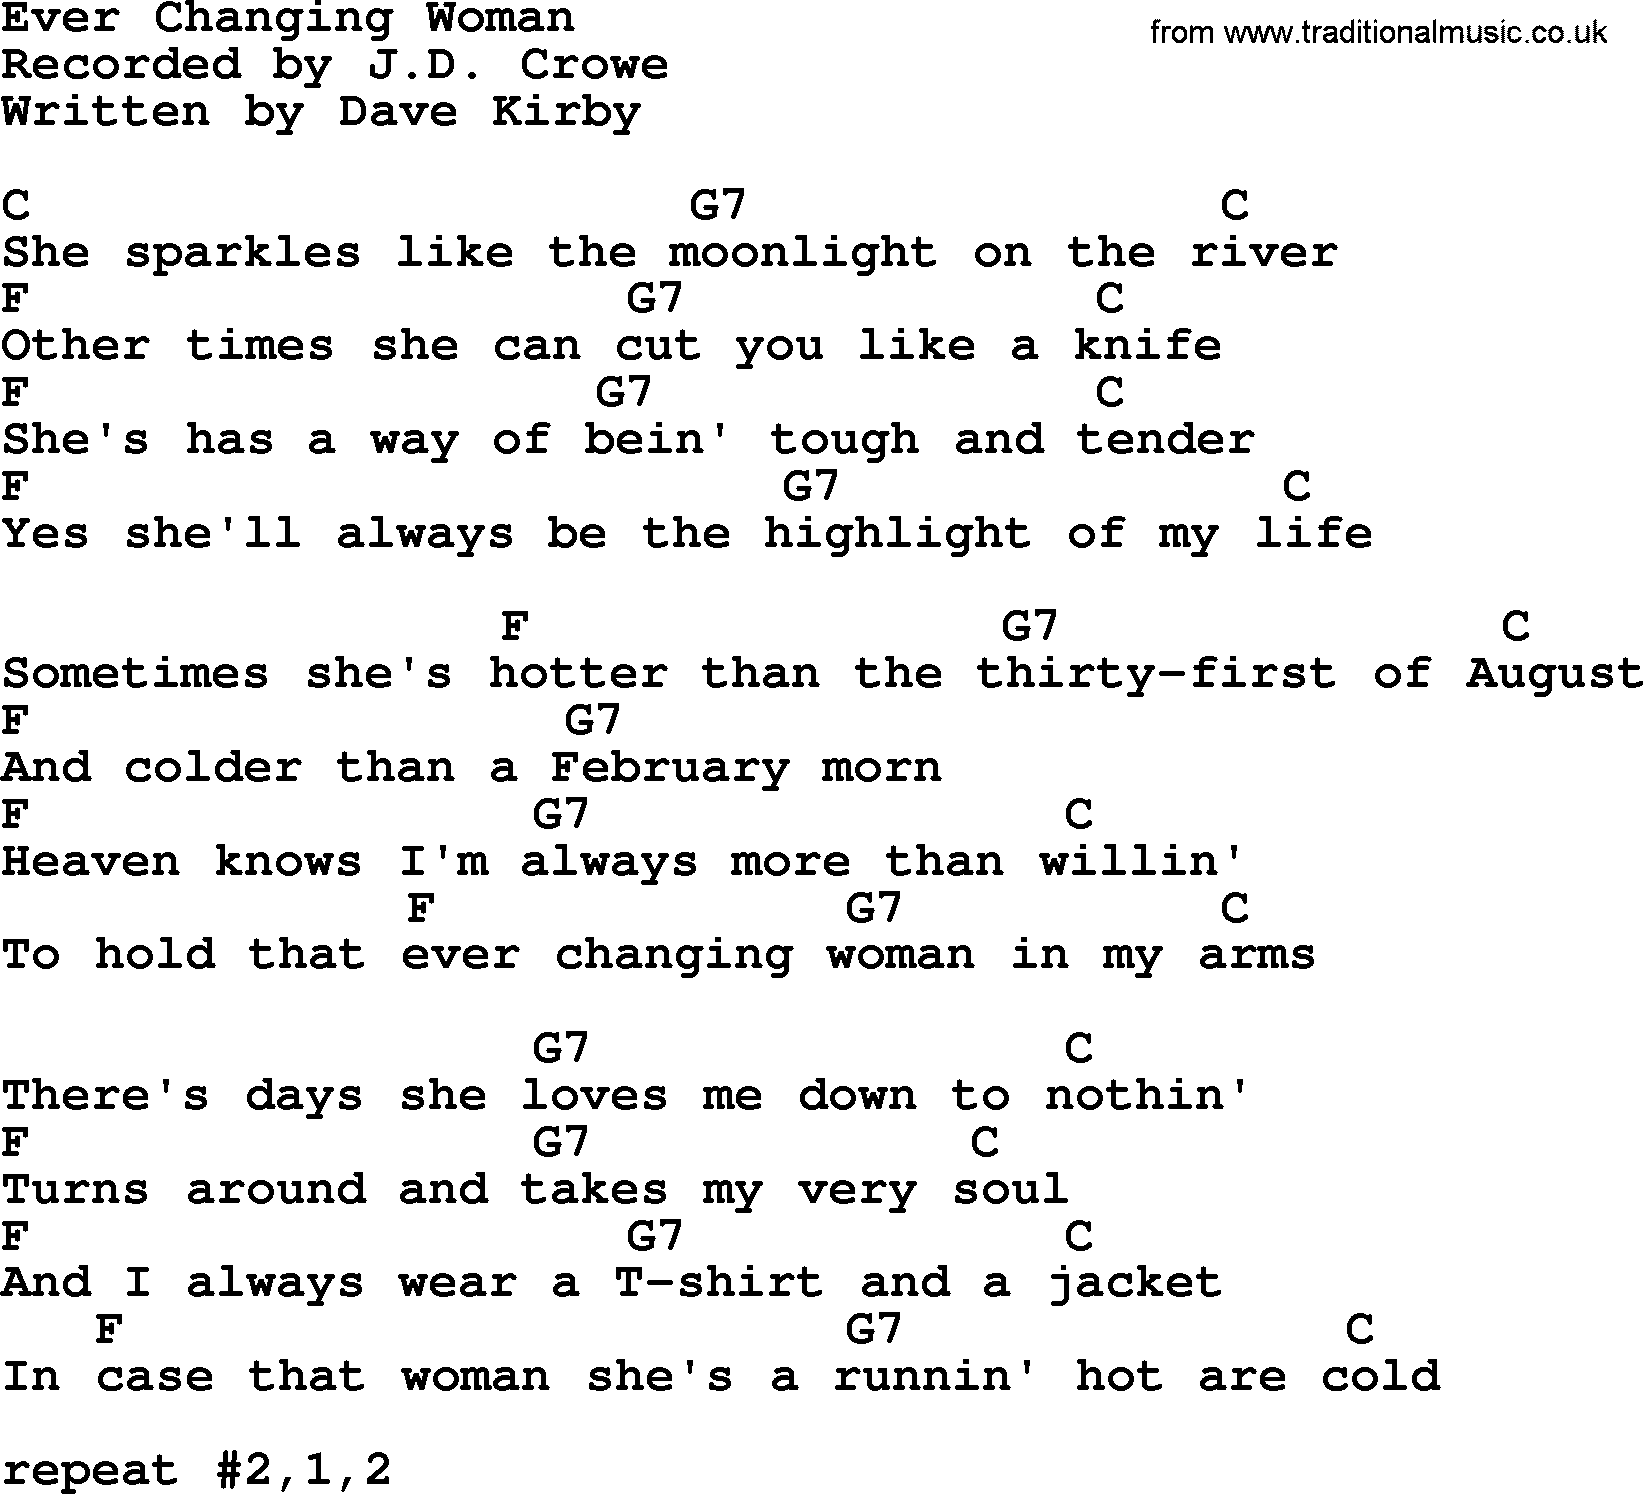 Bluegrass song: Ever Changing Woman, lyrics and chords